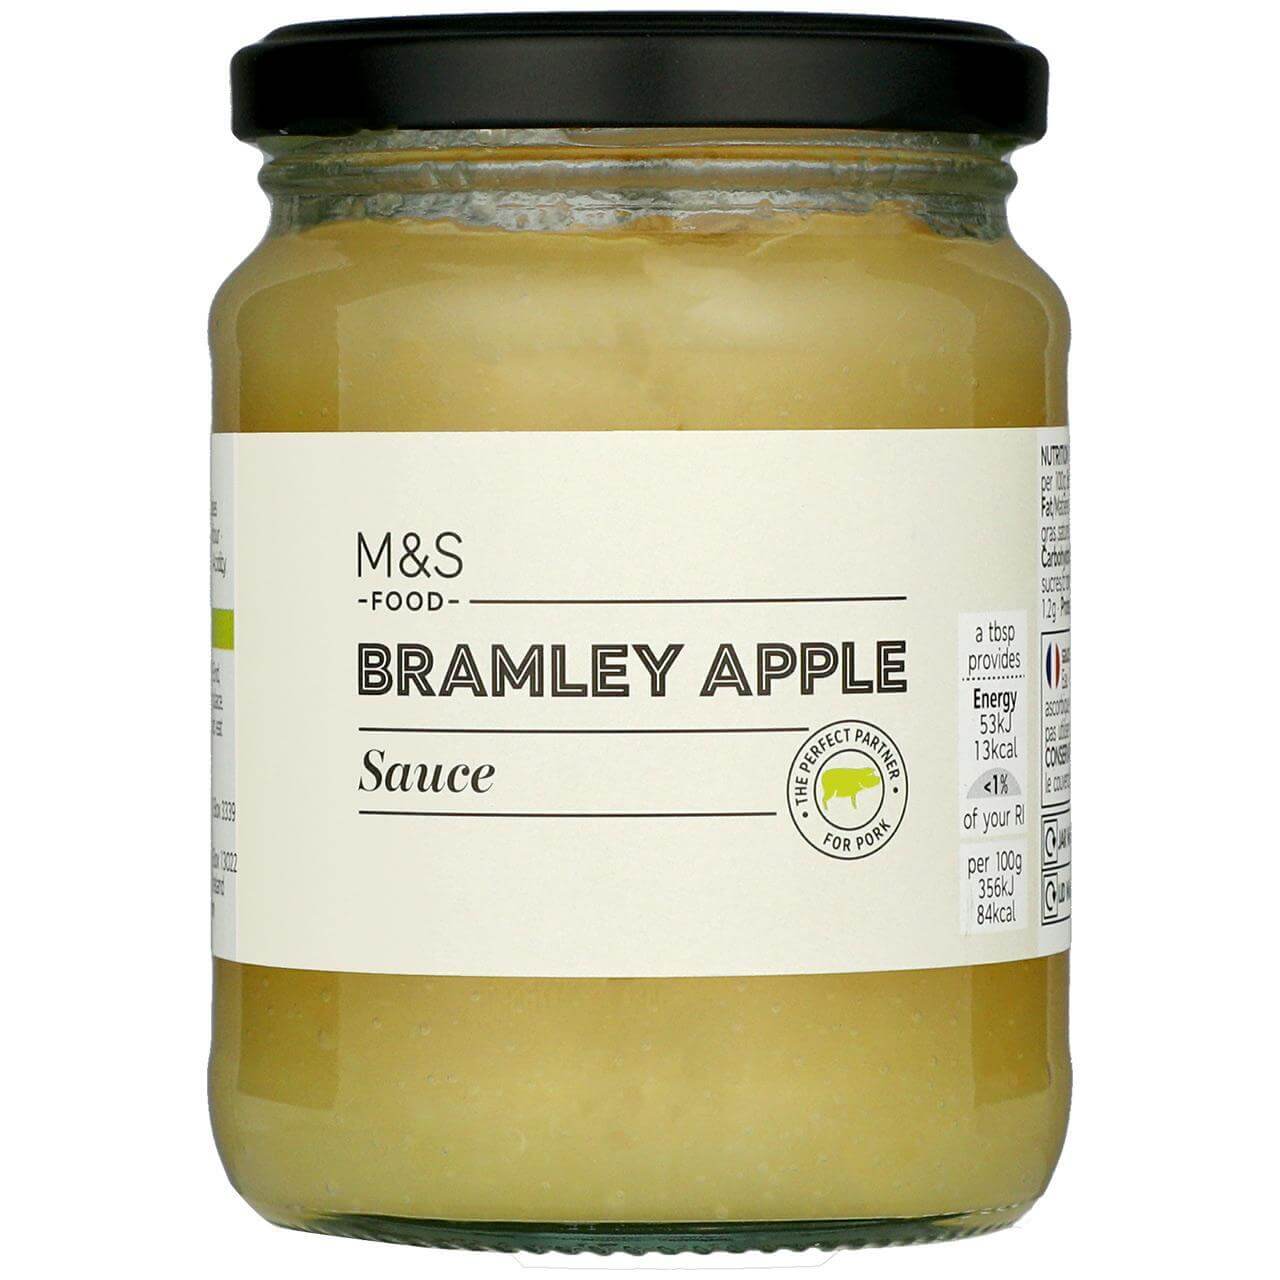 Image of M&S Bramley Apple Sauce made in the UK by Marks & Spencer Food. Buying this product supports a UK business, jobs and the local community